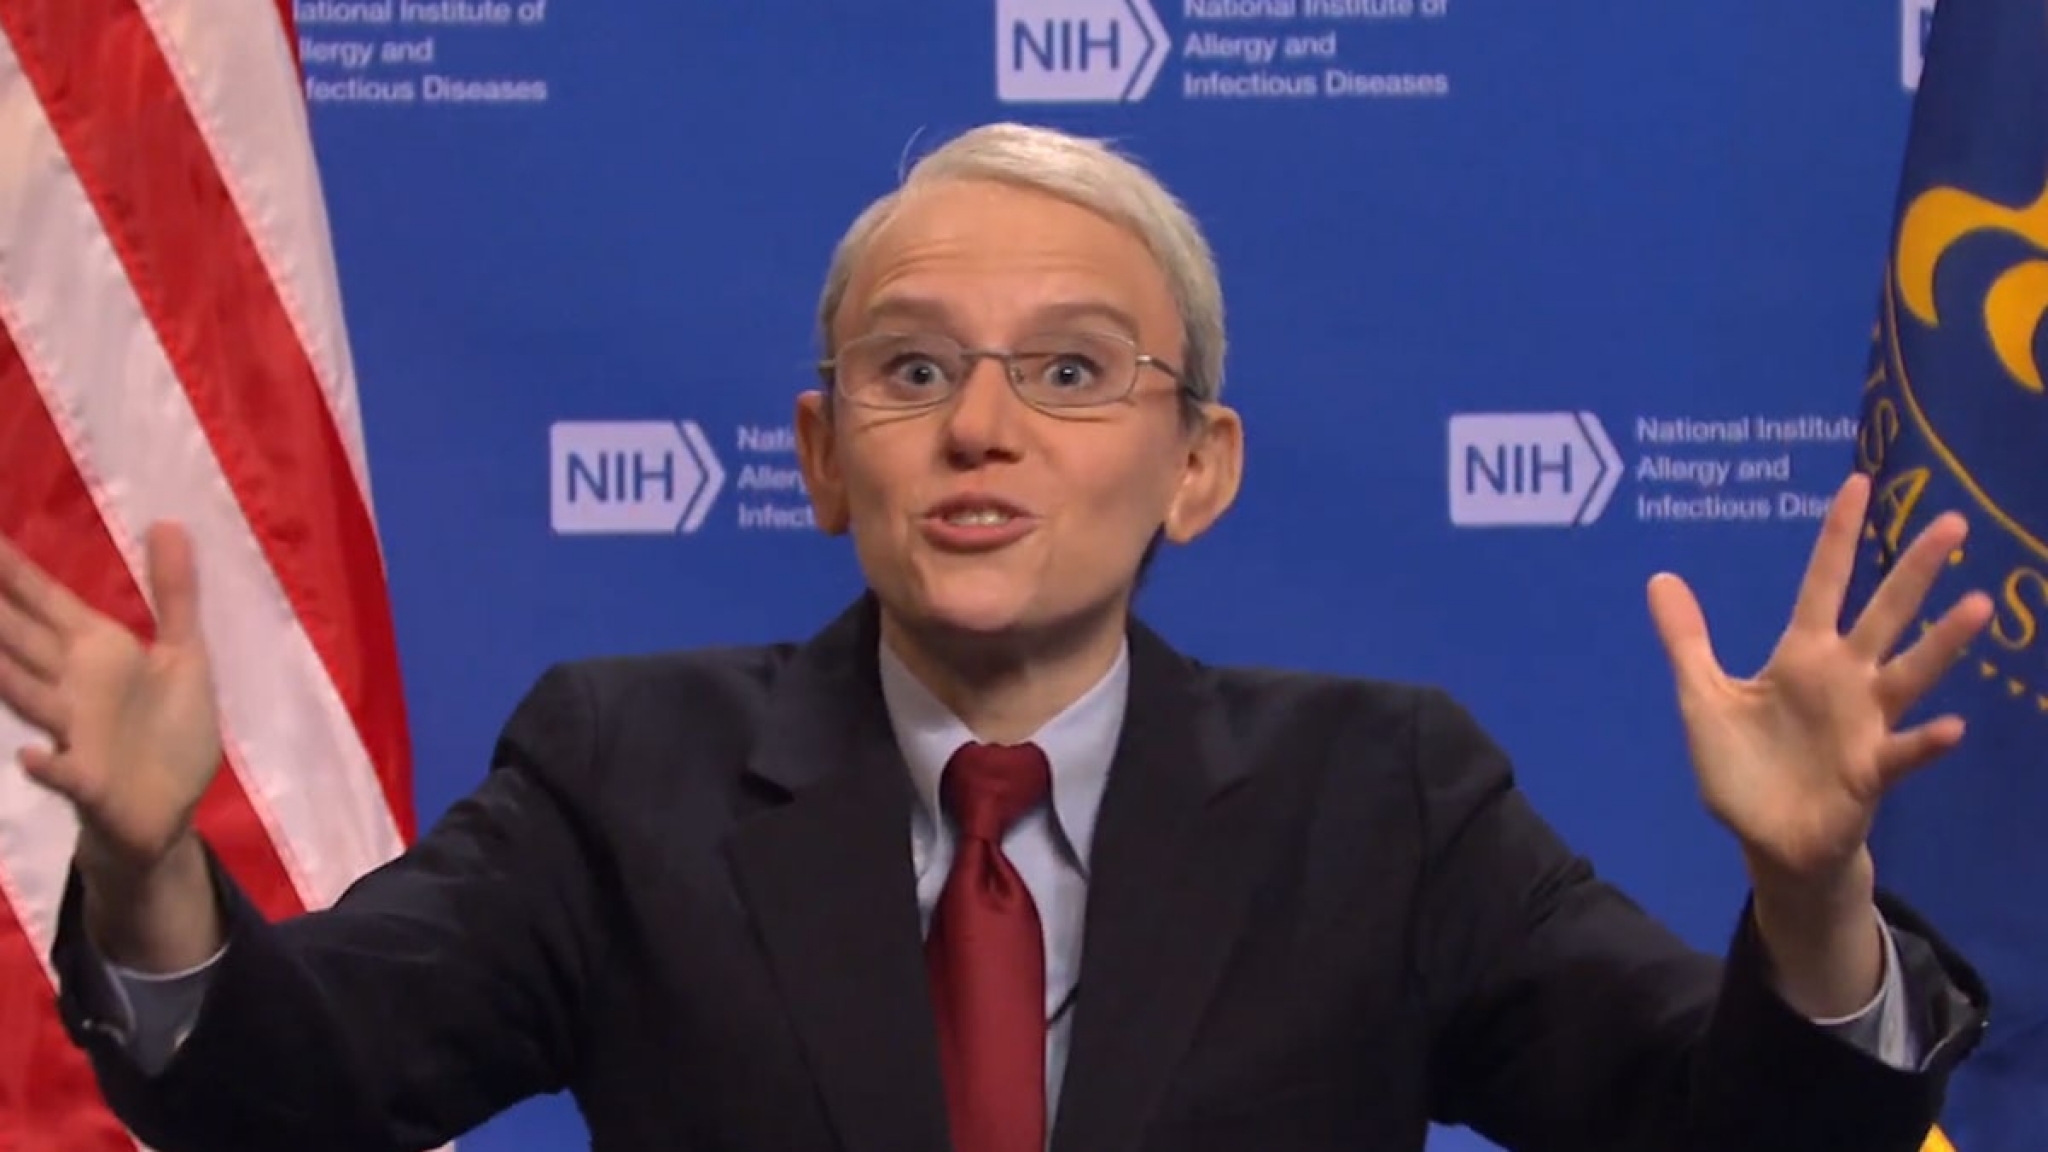 ‘SNL’ Mocks Dr. Fauci in Hilarious Skit Over Mask-Wearing Confusion